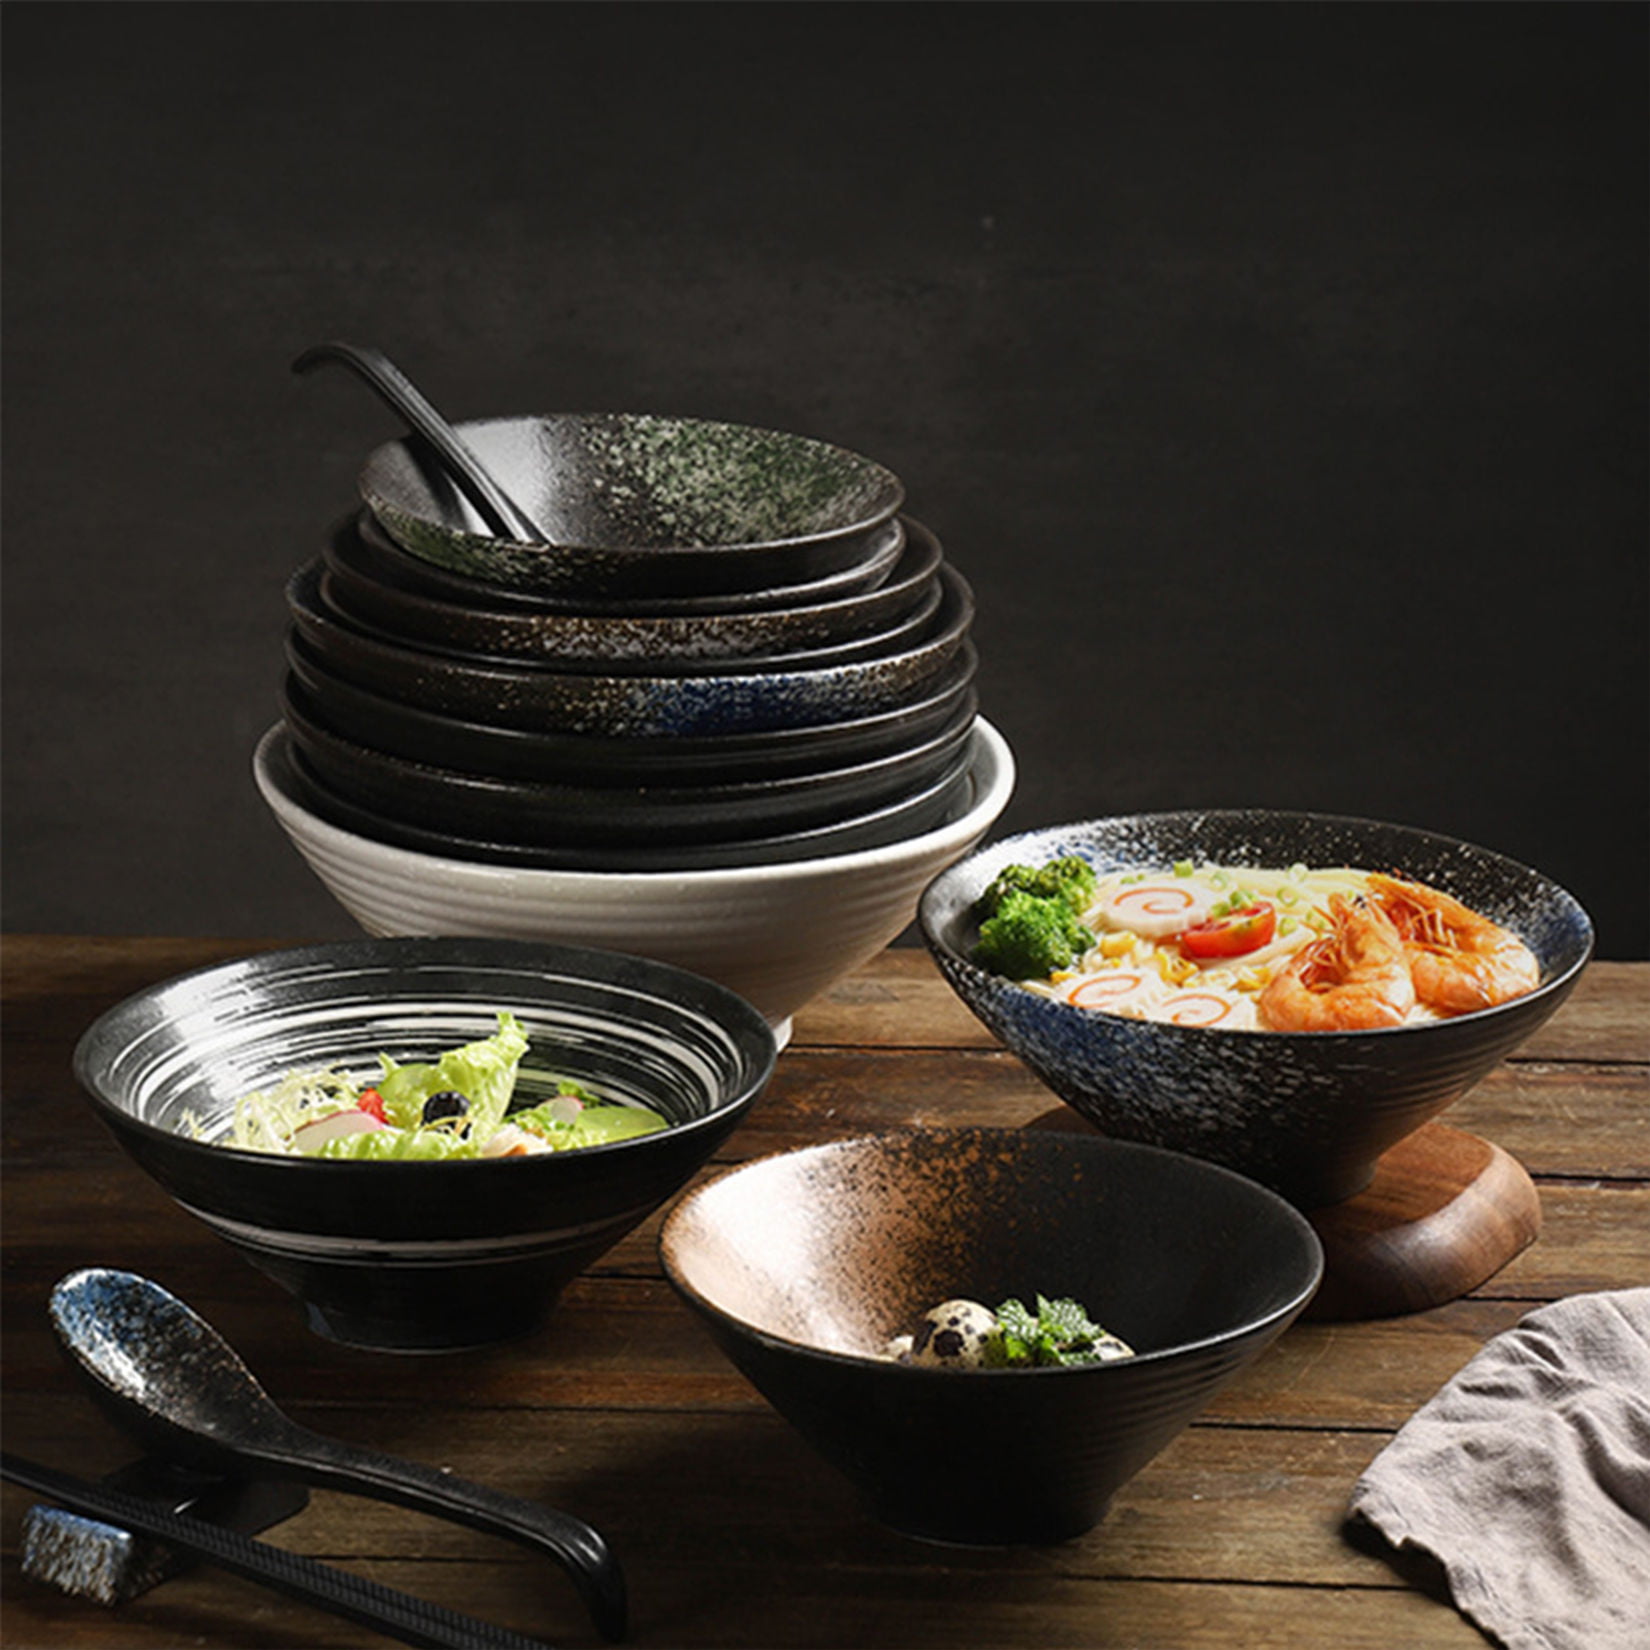 Qeeadeea Ceramic Soup Bowls with Lid Set of 2, Rice Bowls Set of 2, Small Ramen Bowls Microwave Safe-fish-750ml, Size: 750 mL, Gray